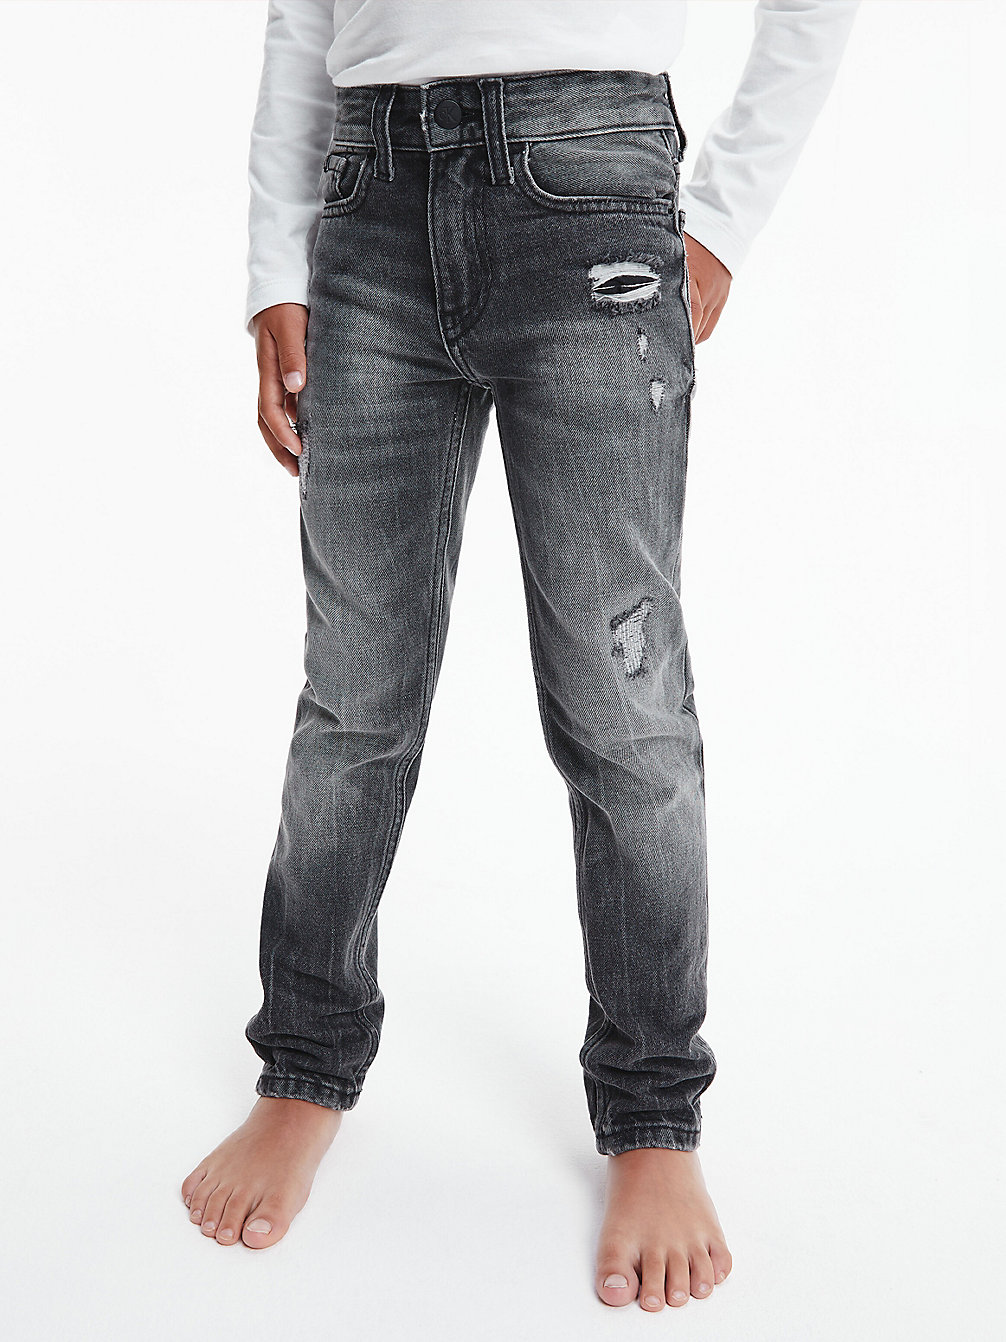 Mid Rise Slim Jeans > WASHED GREY DESTRUCTED > undefined bambino > Calvin Klein